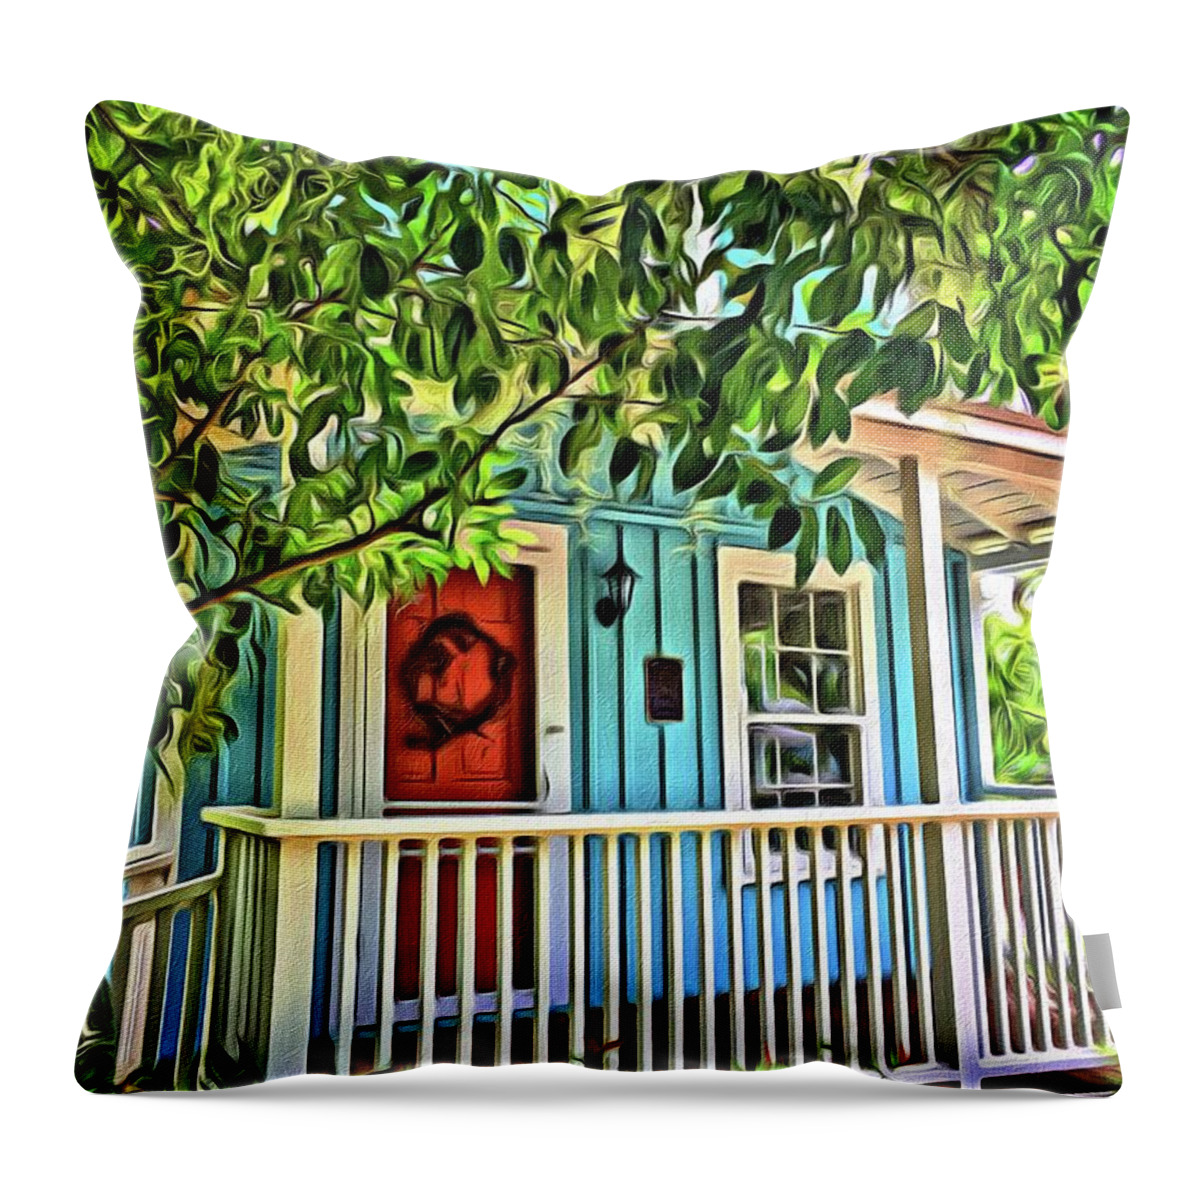 Alicegipsonphotographs Throw Pillow featuring the photograph Wreath On The Door by Alice Gipson